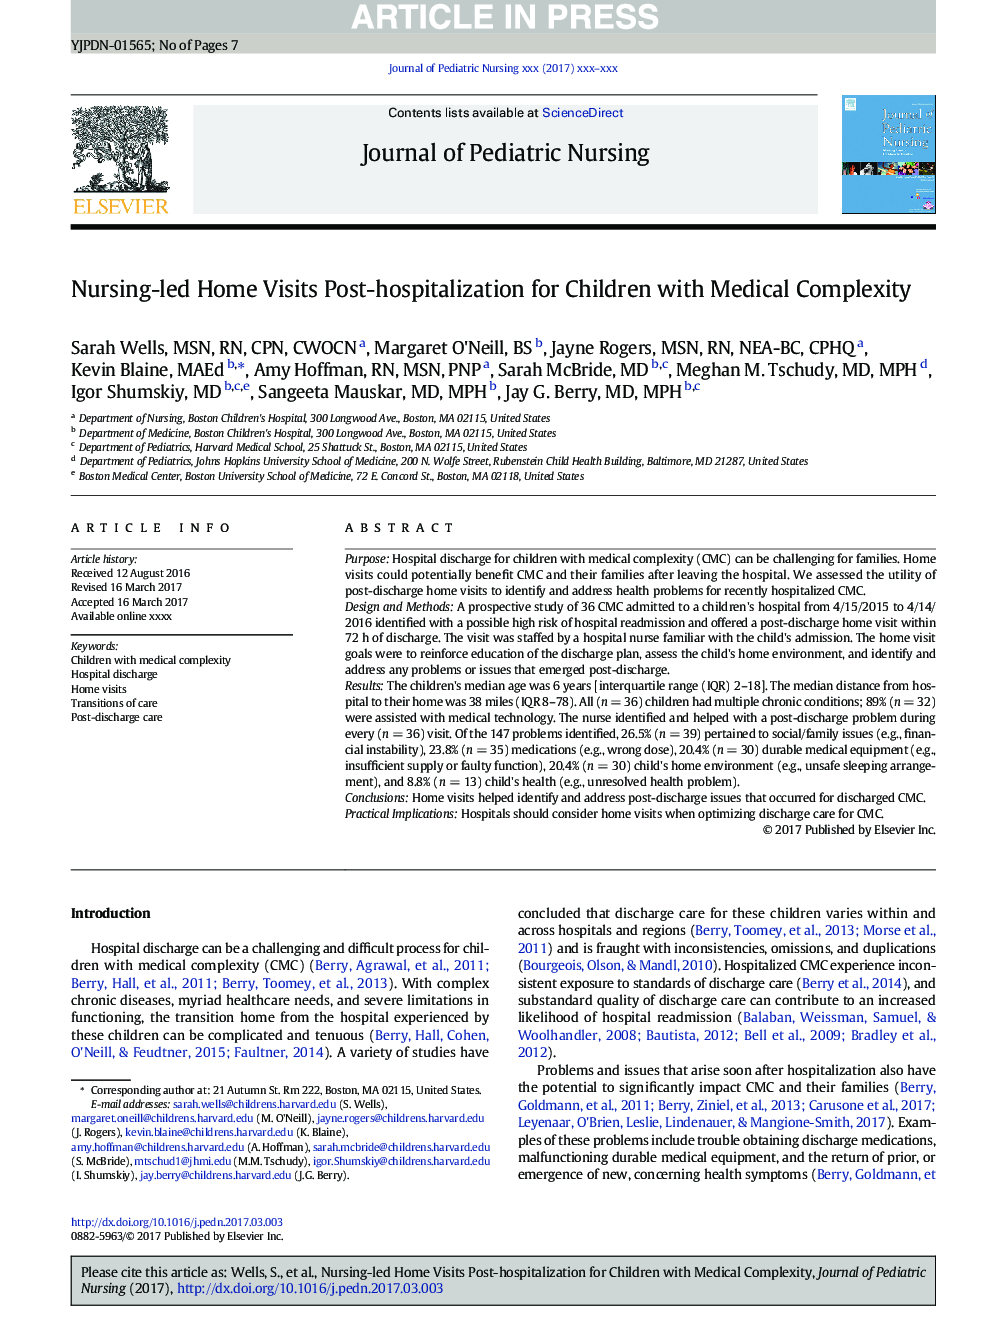 Nursing-led Home Visits Post-hospitalization for Children with Medical Complexity